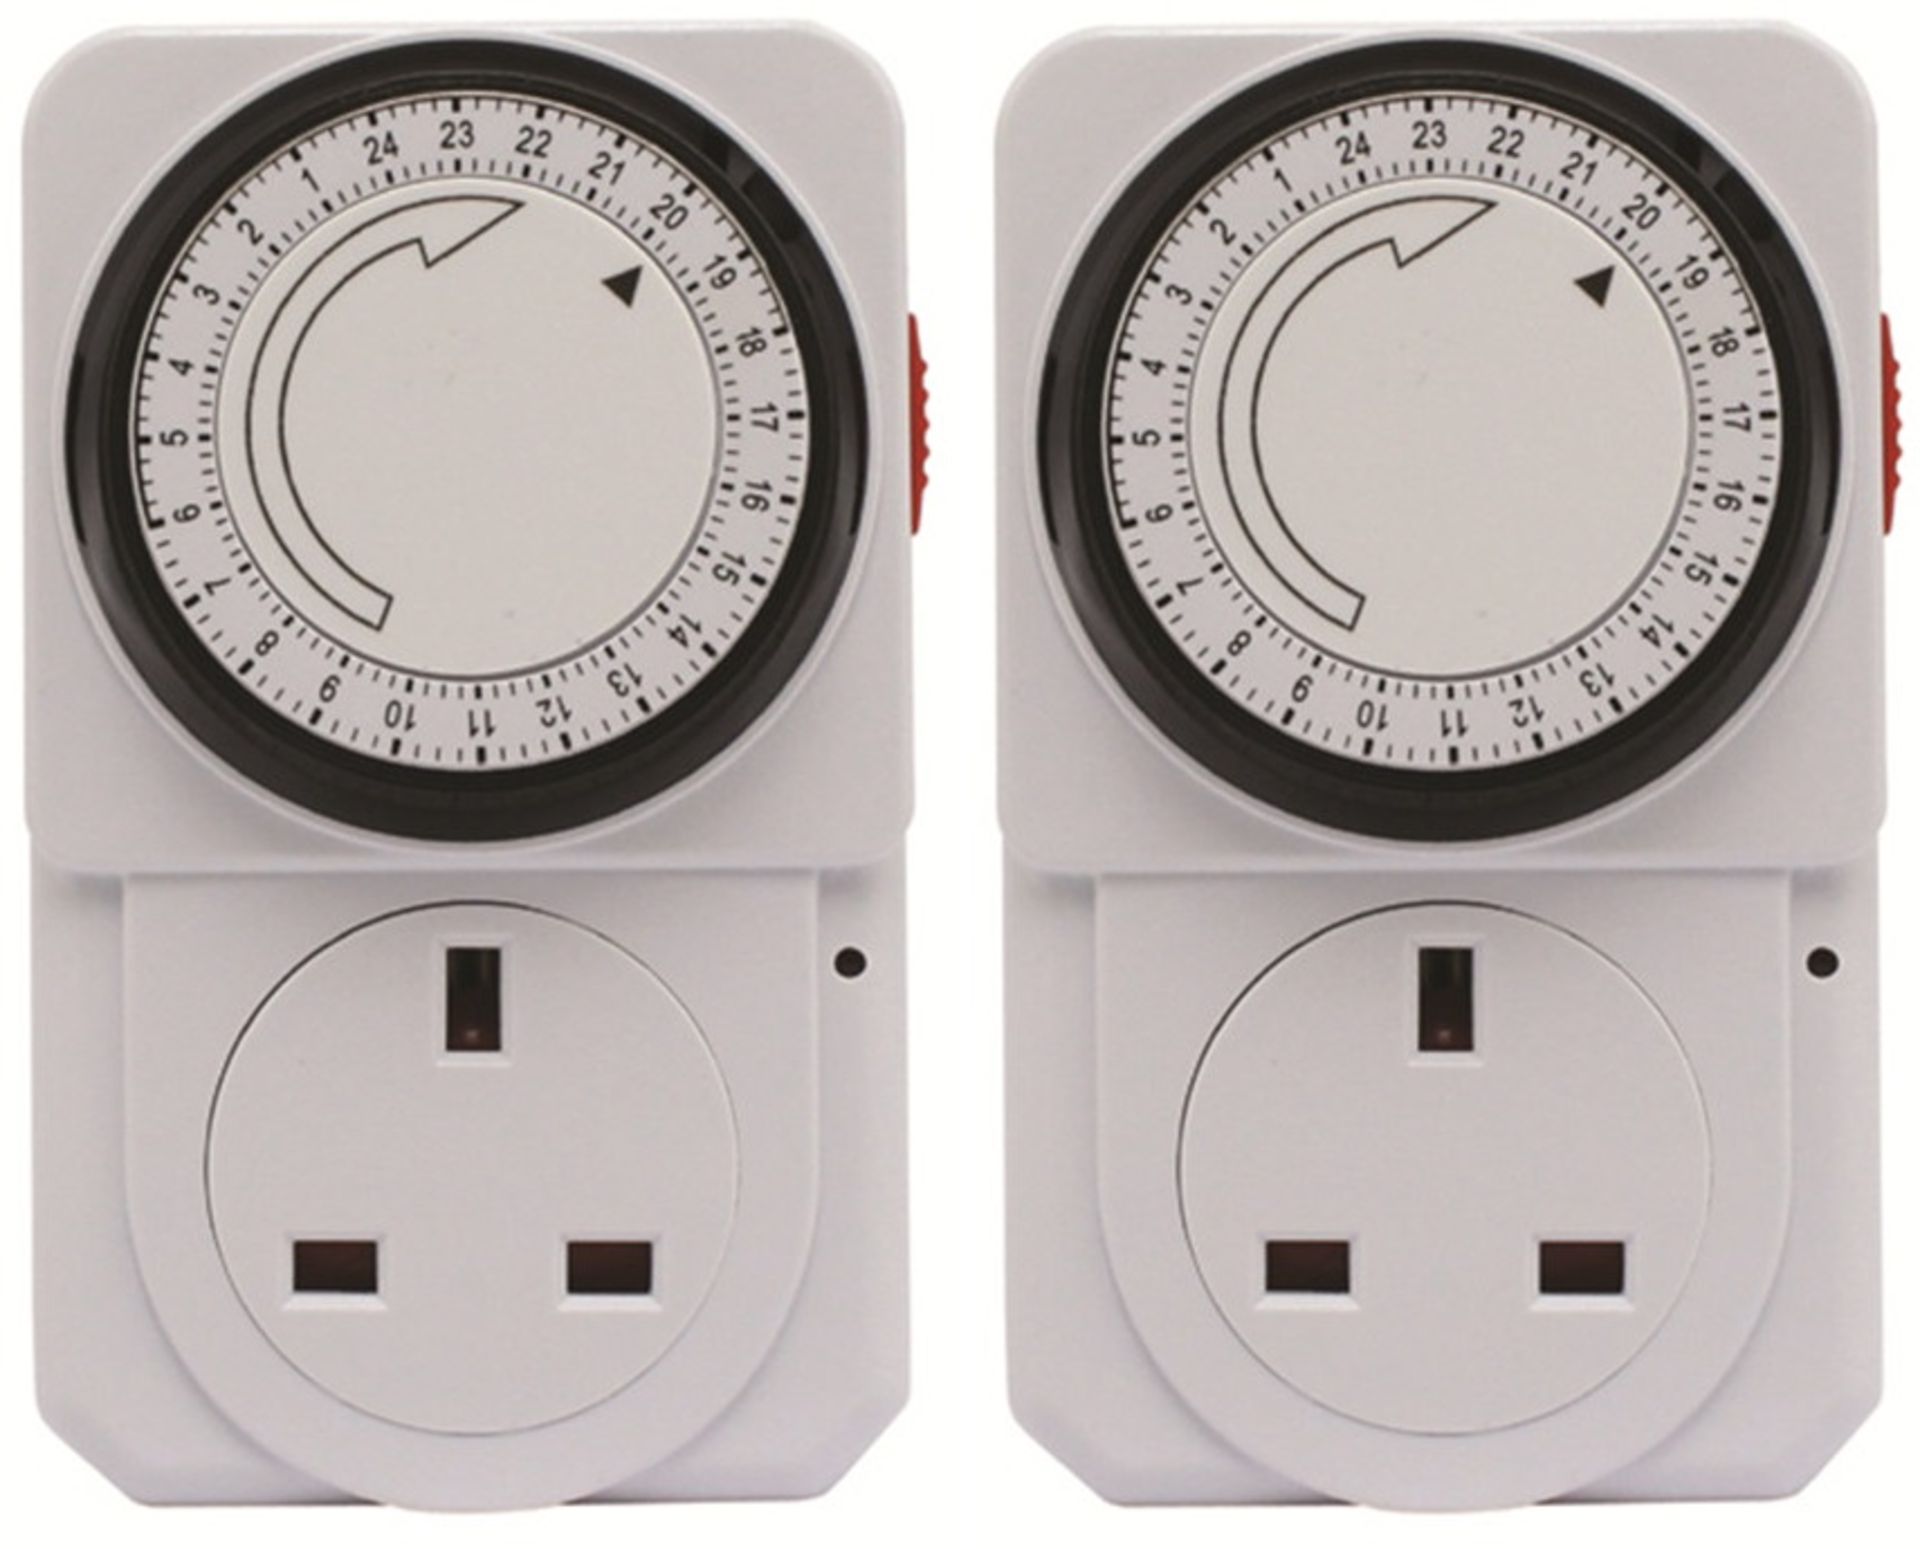 V Brand New Twin Pack Indoor Mechanical Timer Sockets With 24 Hour Timer - 48 Switches Per Day X 2